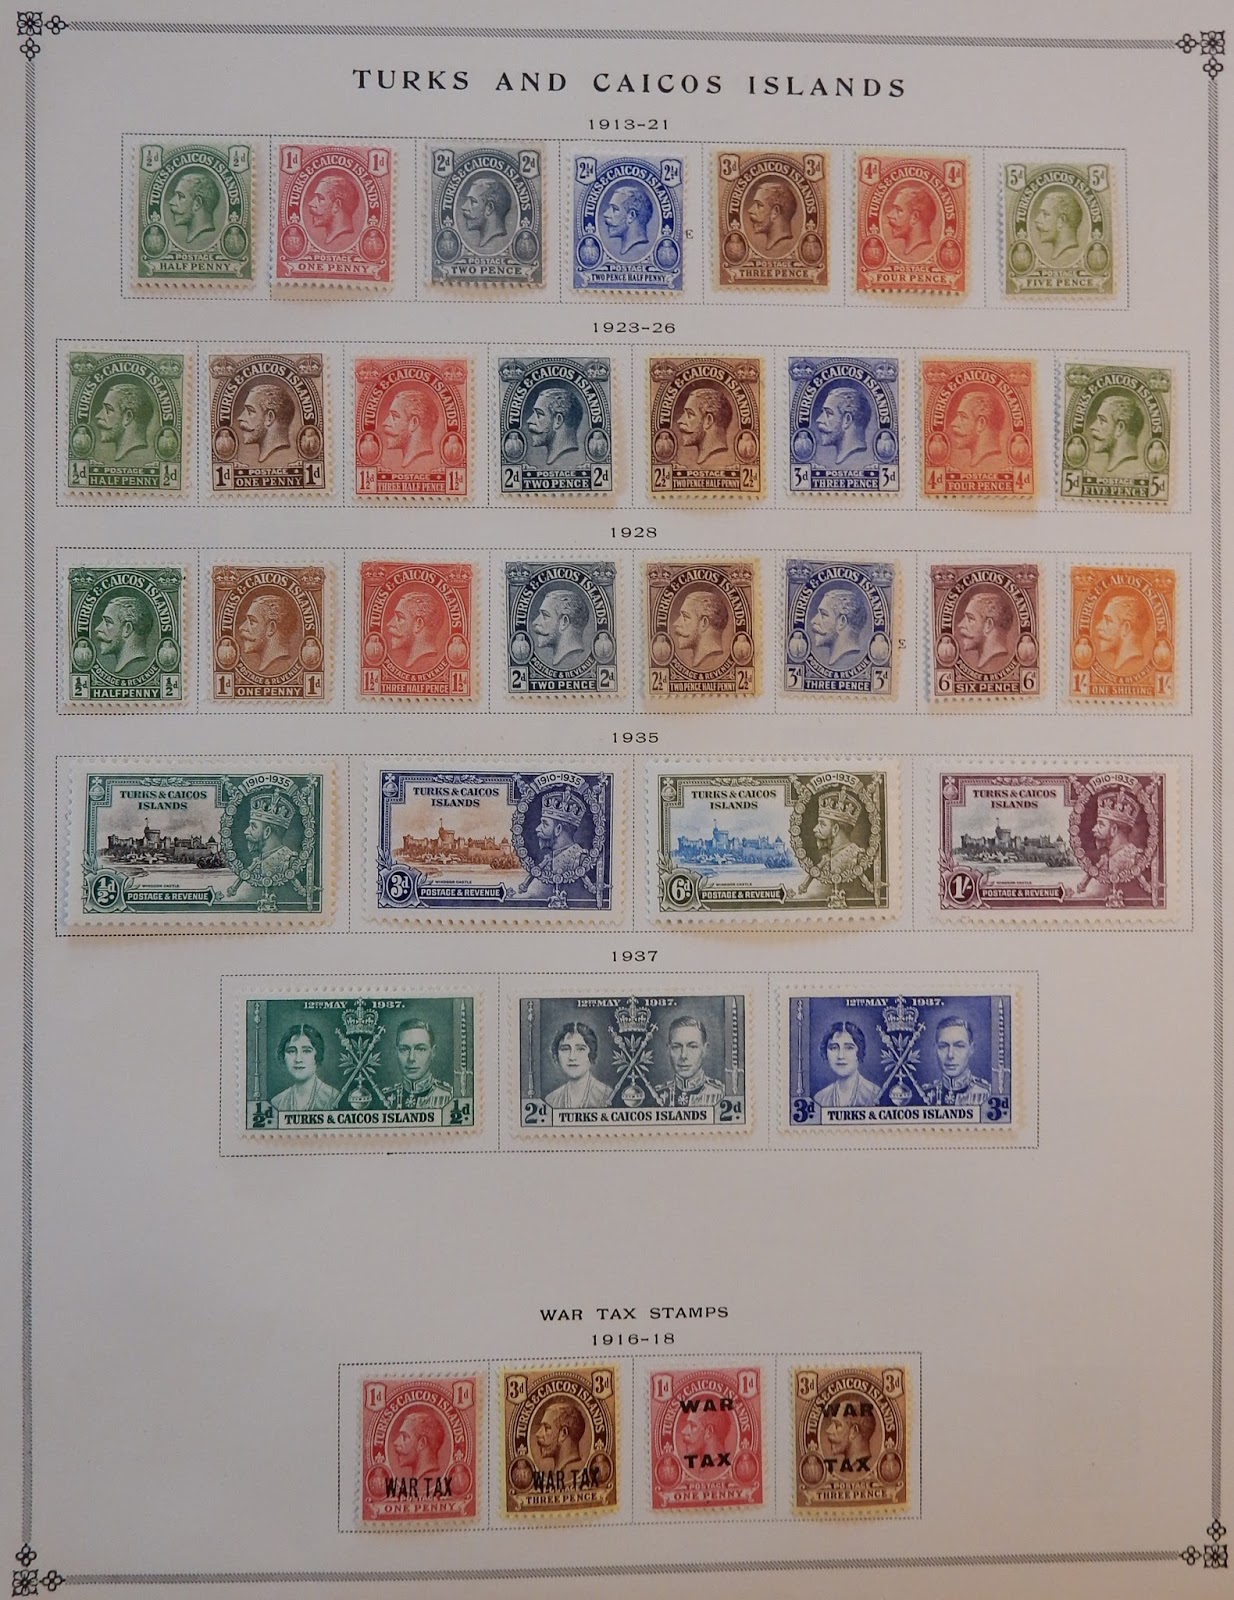 Choosing the Right Stamp Album for You